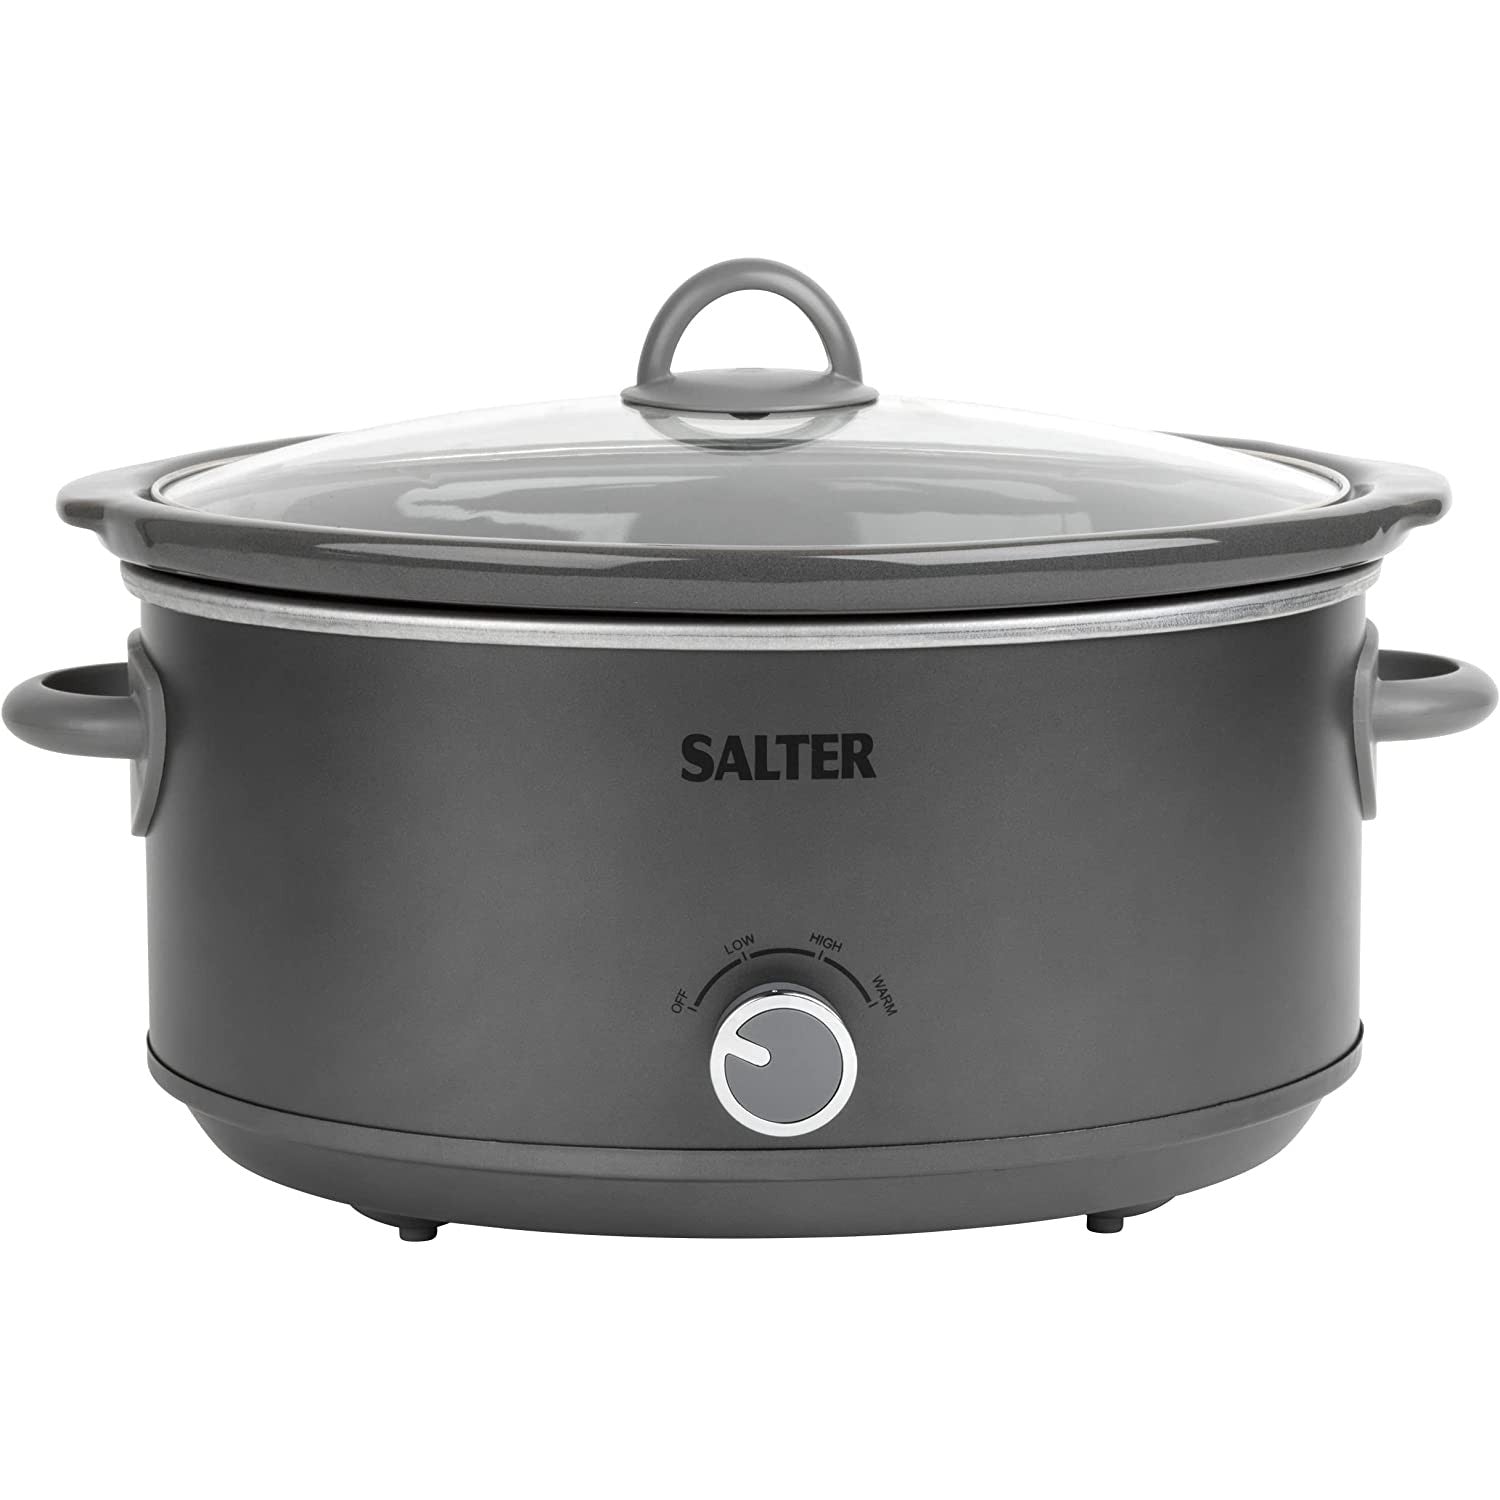 Salter 6.5 Litre Oval Slow Cooker with Removable Crockpot